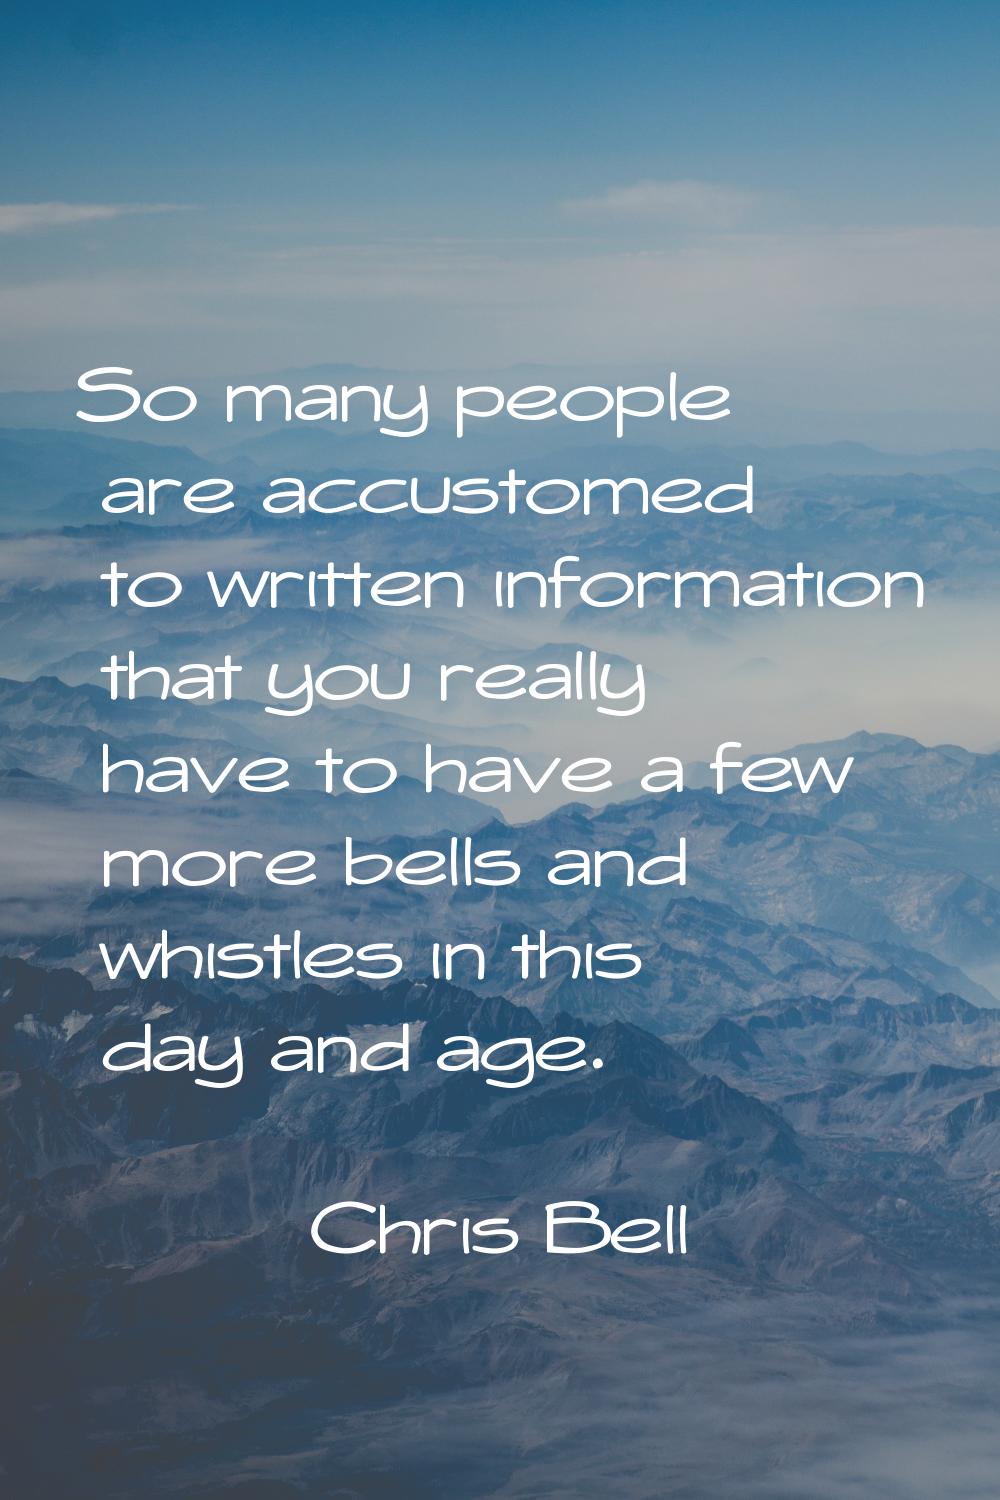 So many people are accustomed to written information that you really have to have a few more bells 